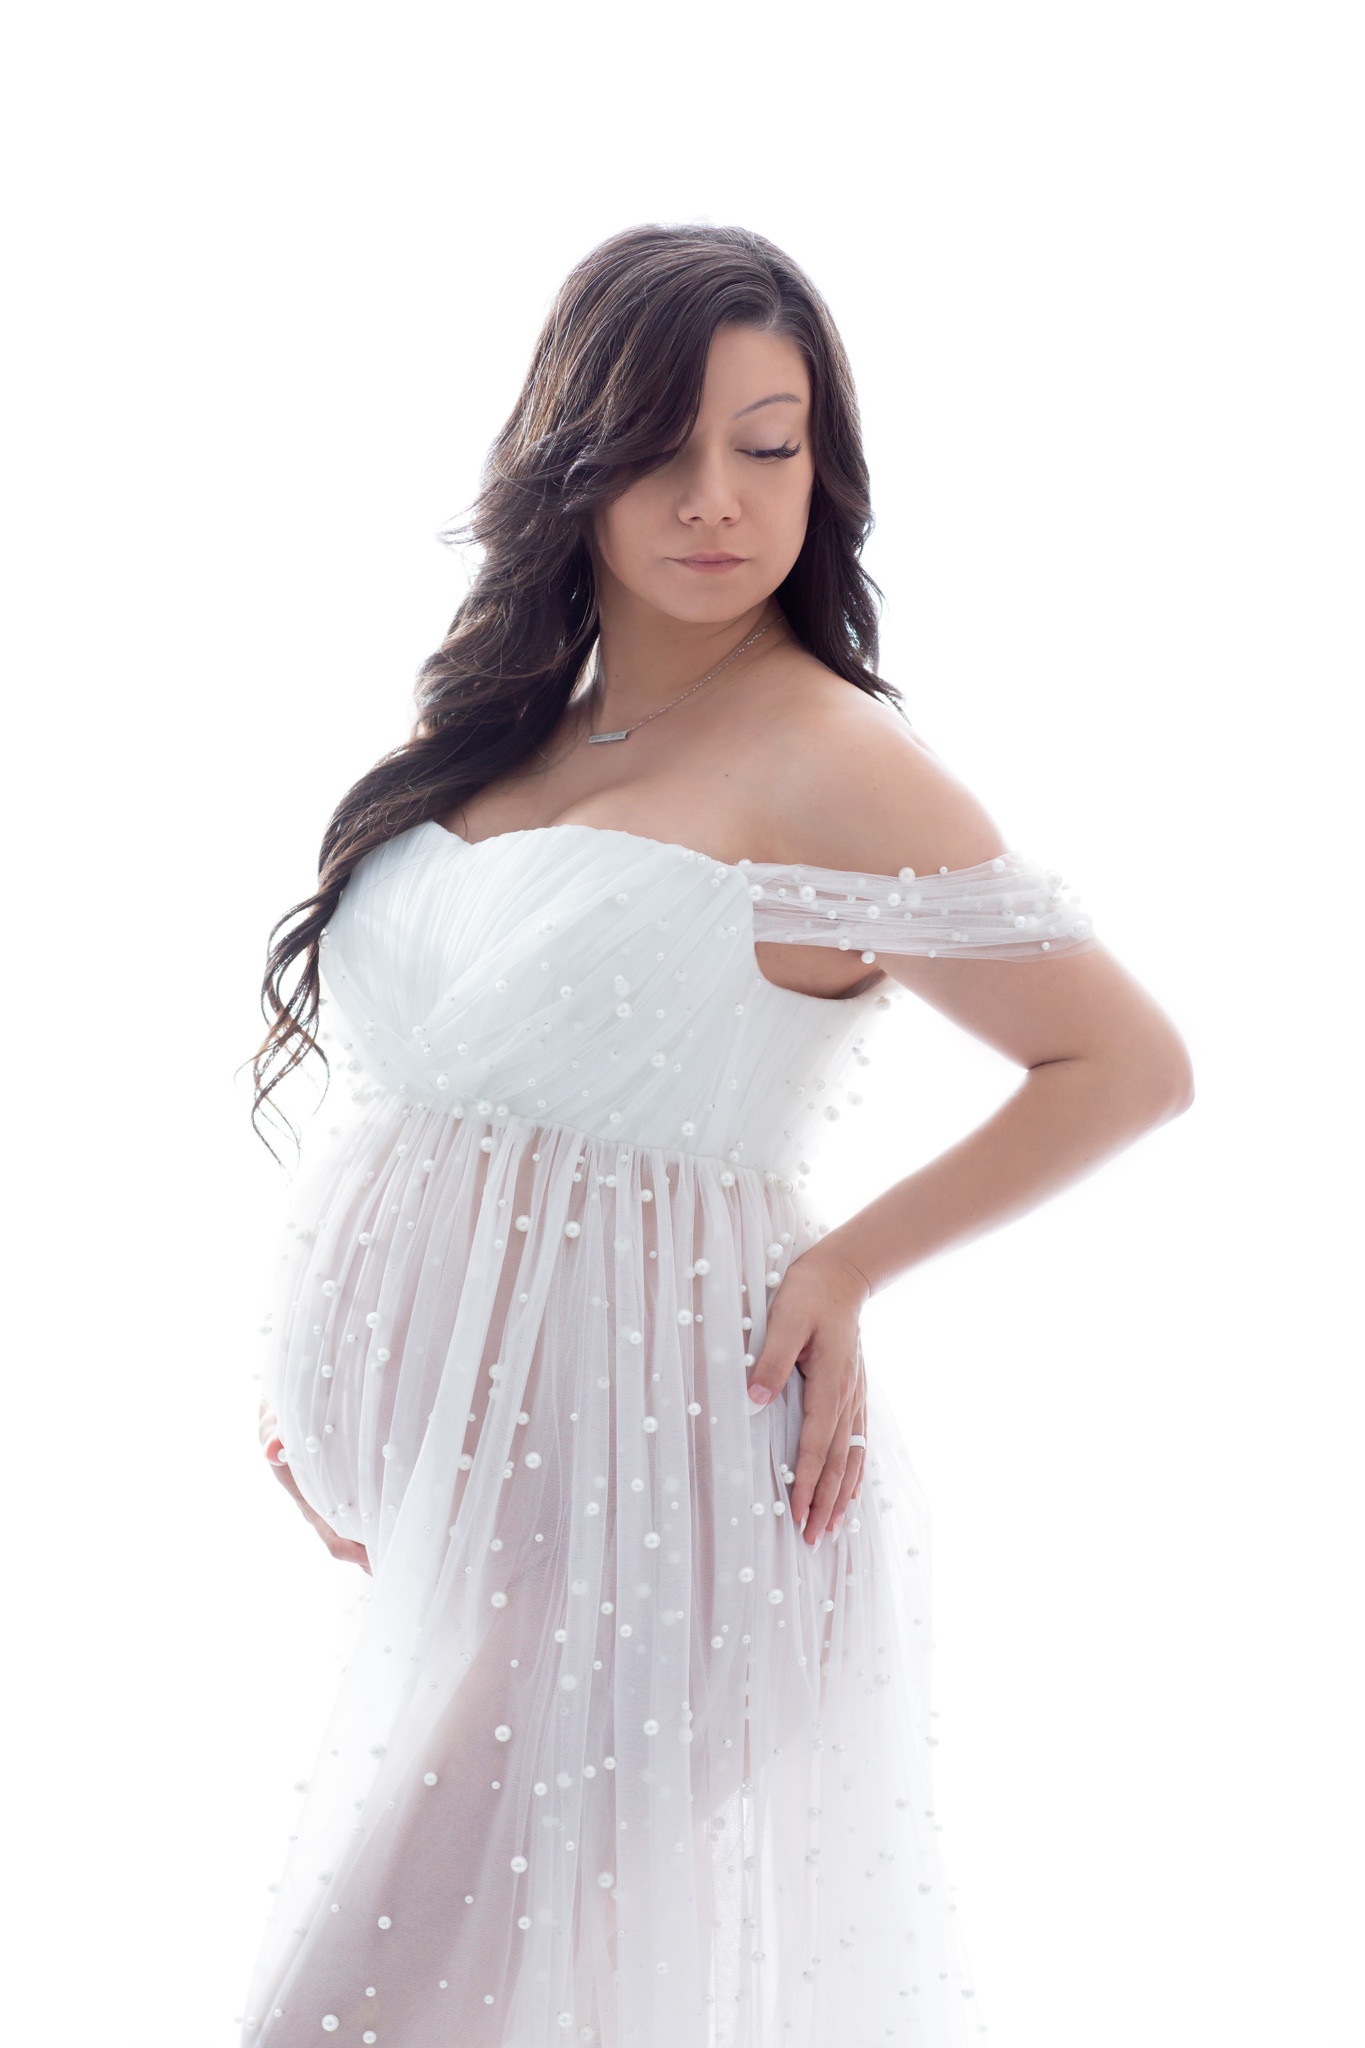 Preparing For Your Maternity Photography Session